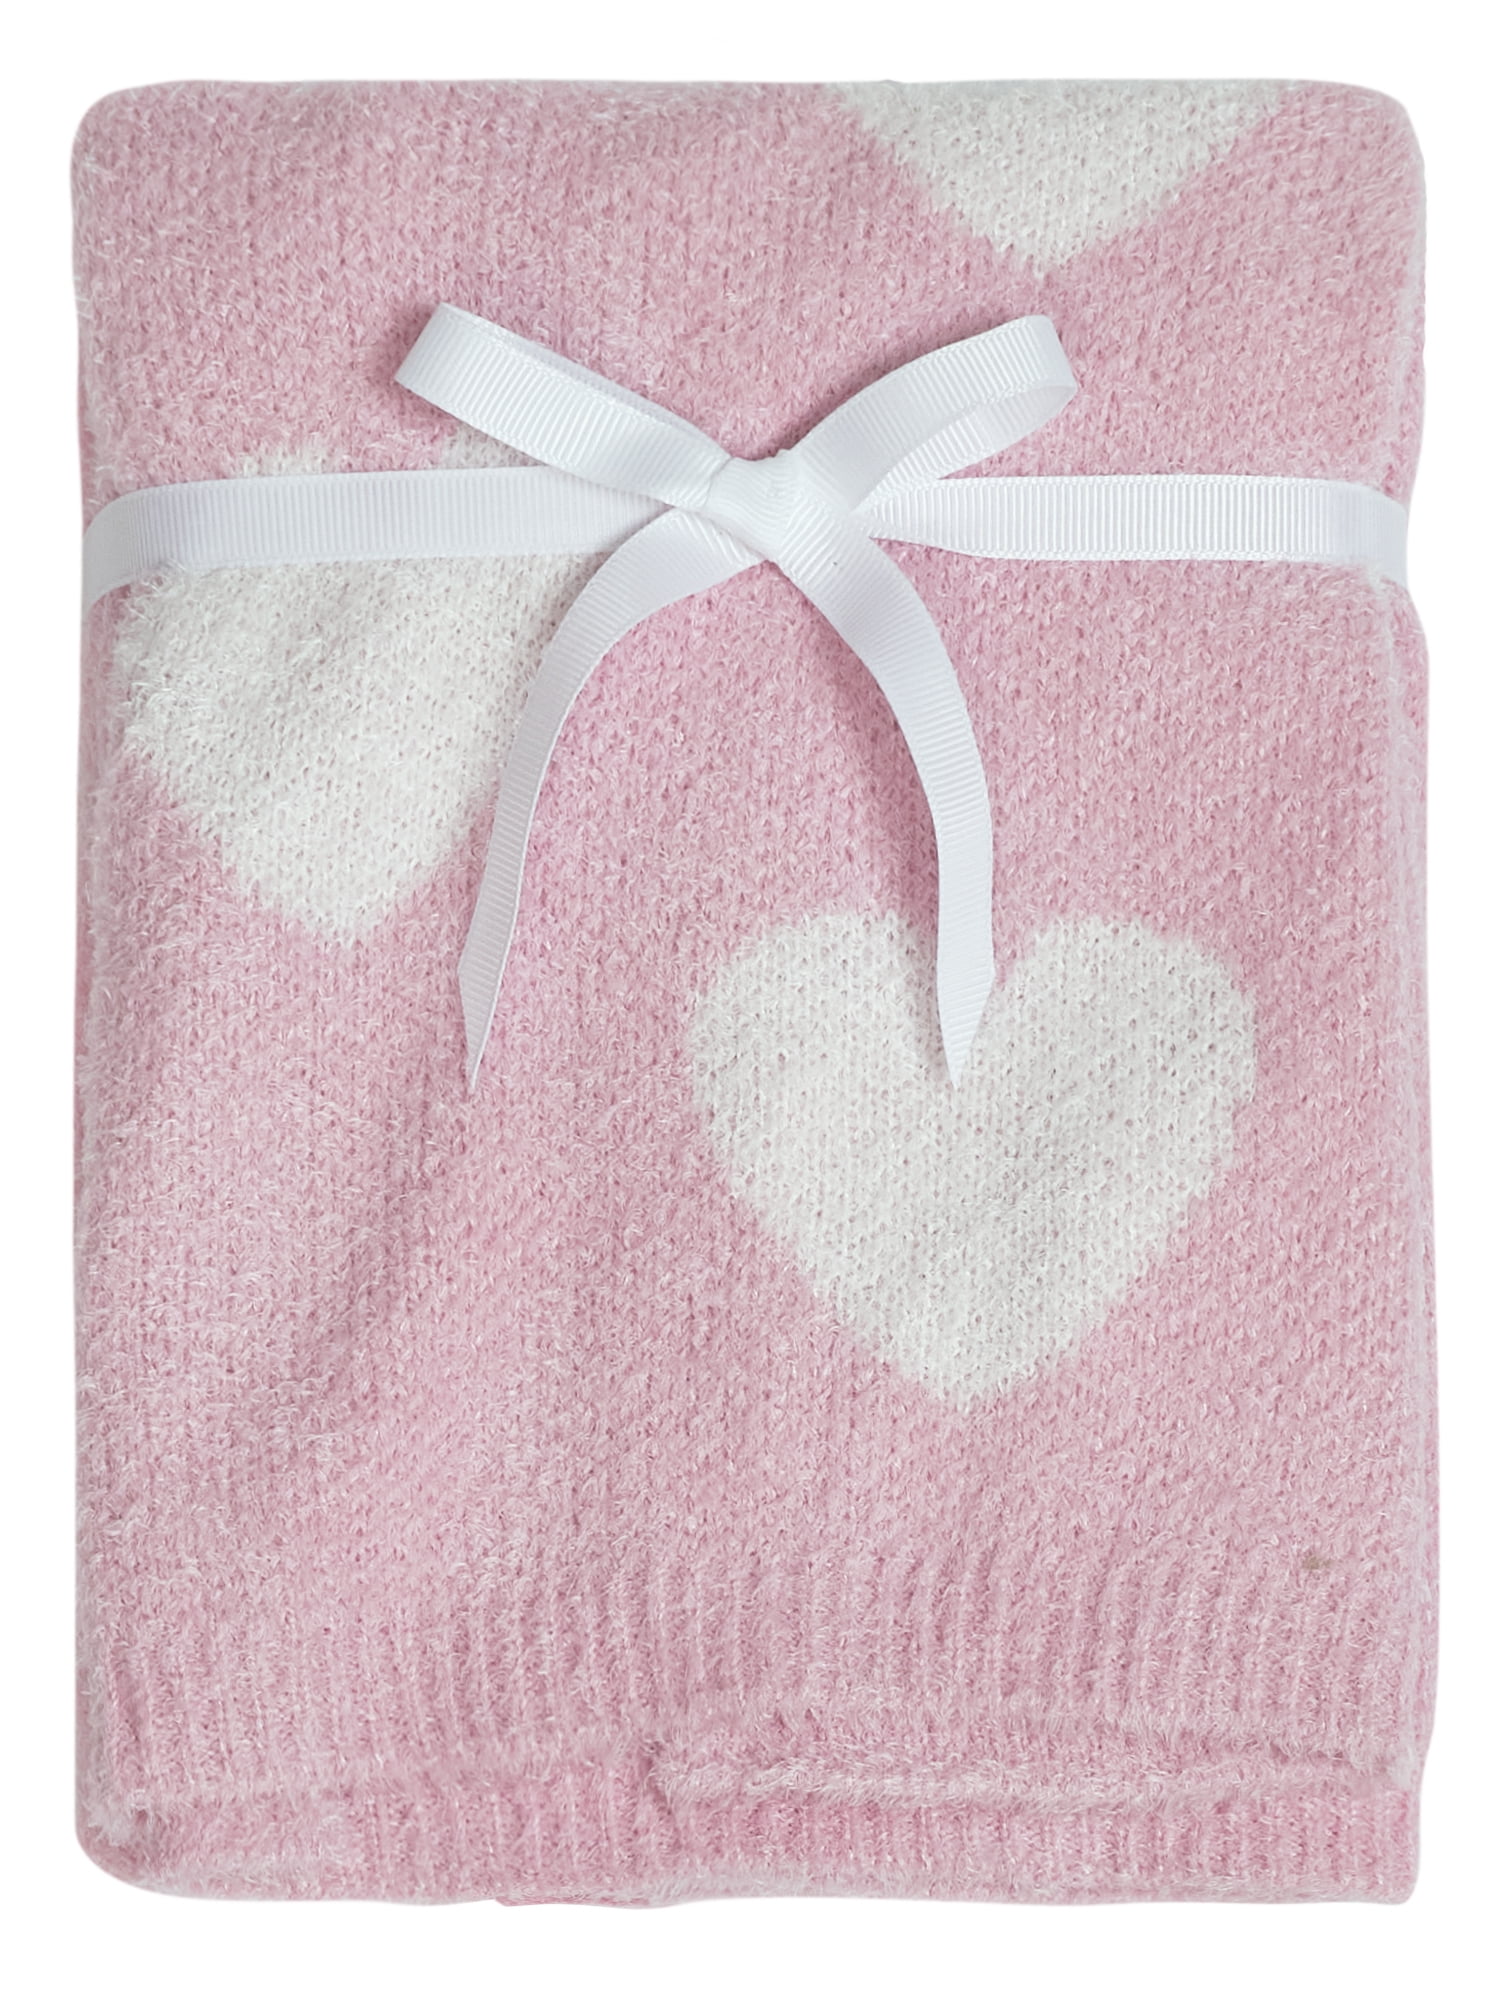 Modern Moments by Gerber Baby Boy or Girl Gender Neutral Soft Cozy Blanket, Pink Hearts